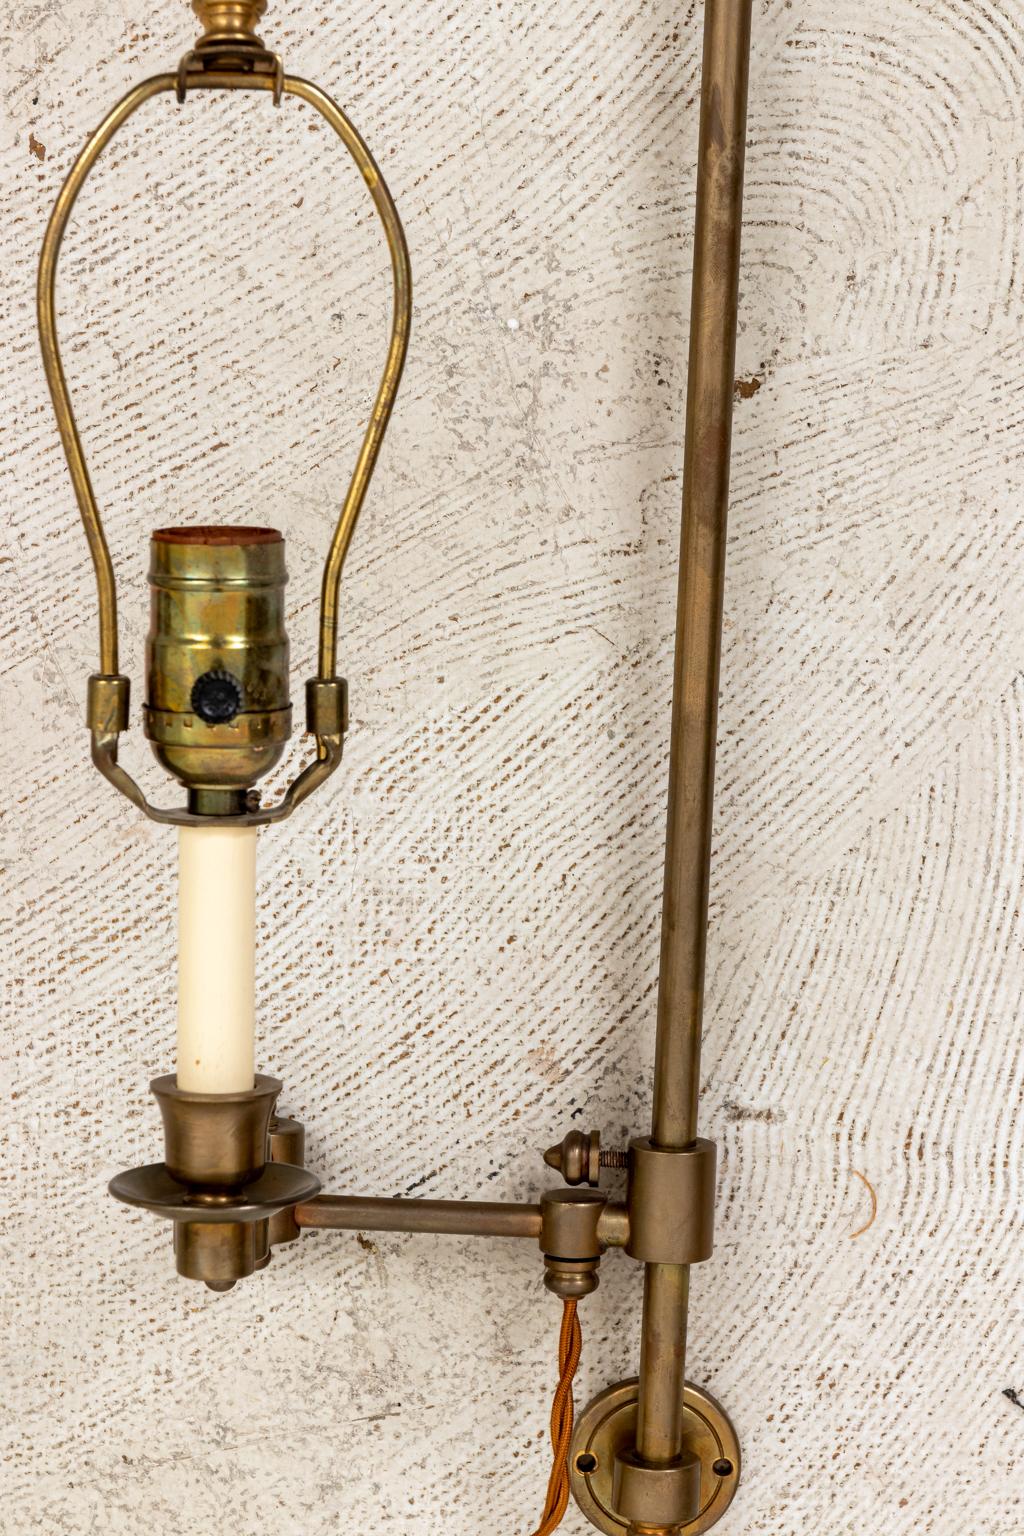 Pair of brass swing arm library sconces. Made in the United States. Please note of wear consistent with age. The sconces are in very good condition. Shades not included.